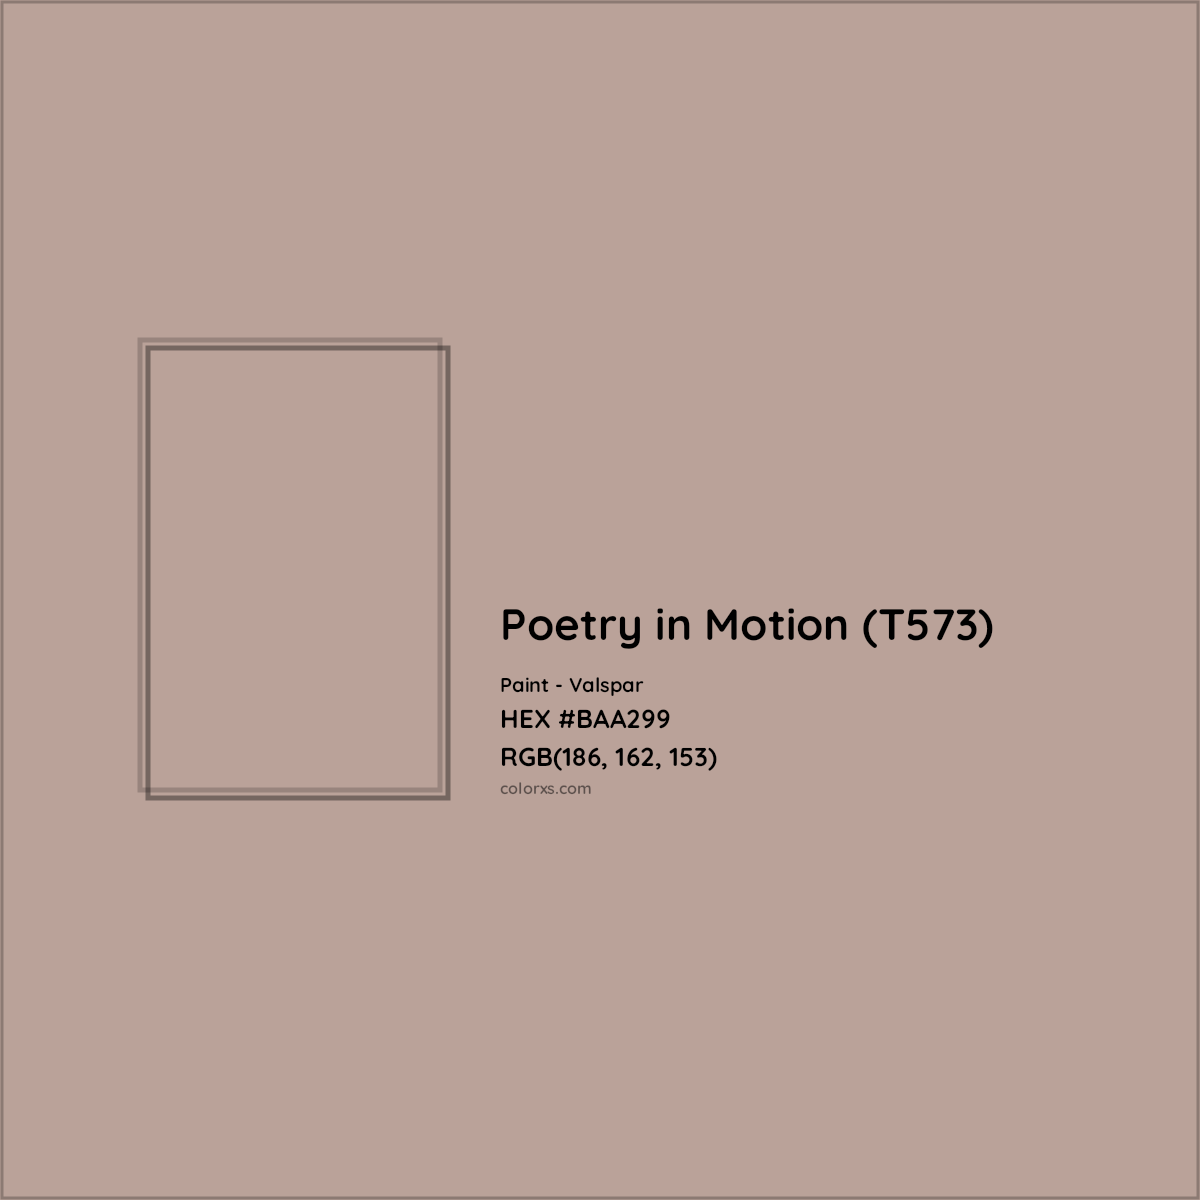 HEX #BAA299 Poetry in Motion (T573) Paint Valspar - Color Code